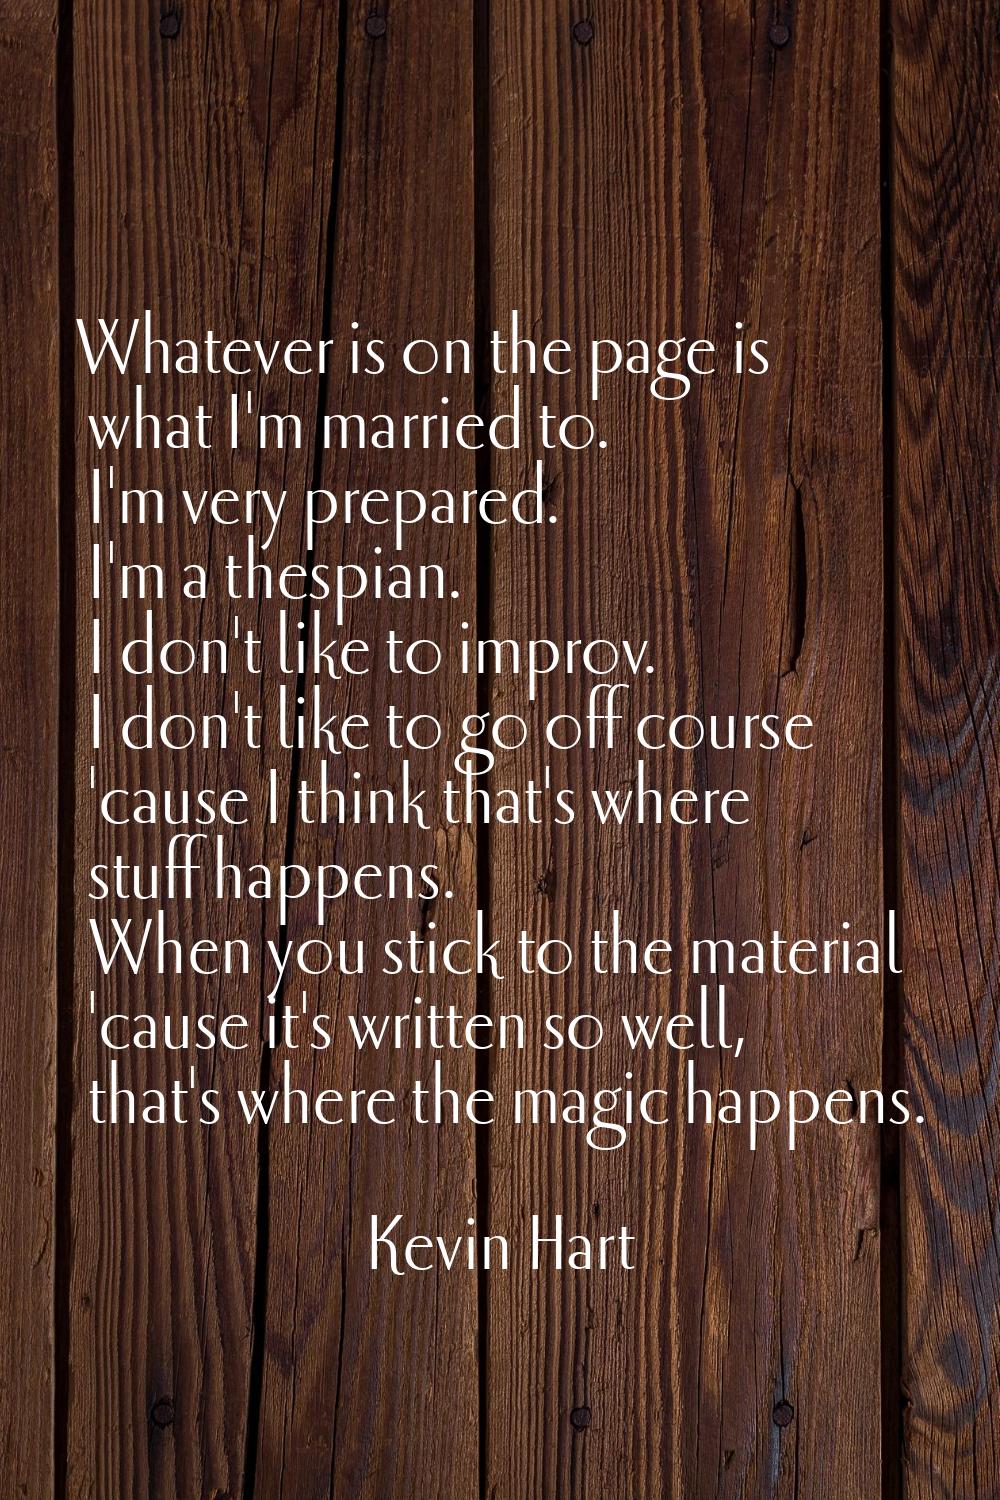 Whatever is on the page is what I'm married to. I'm very prepared. I'm a thespian. I don't like to 